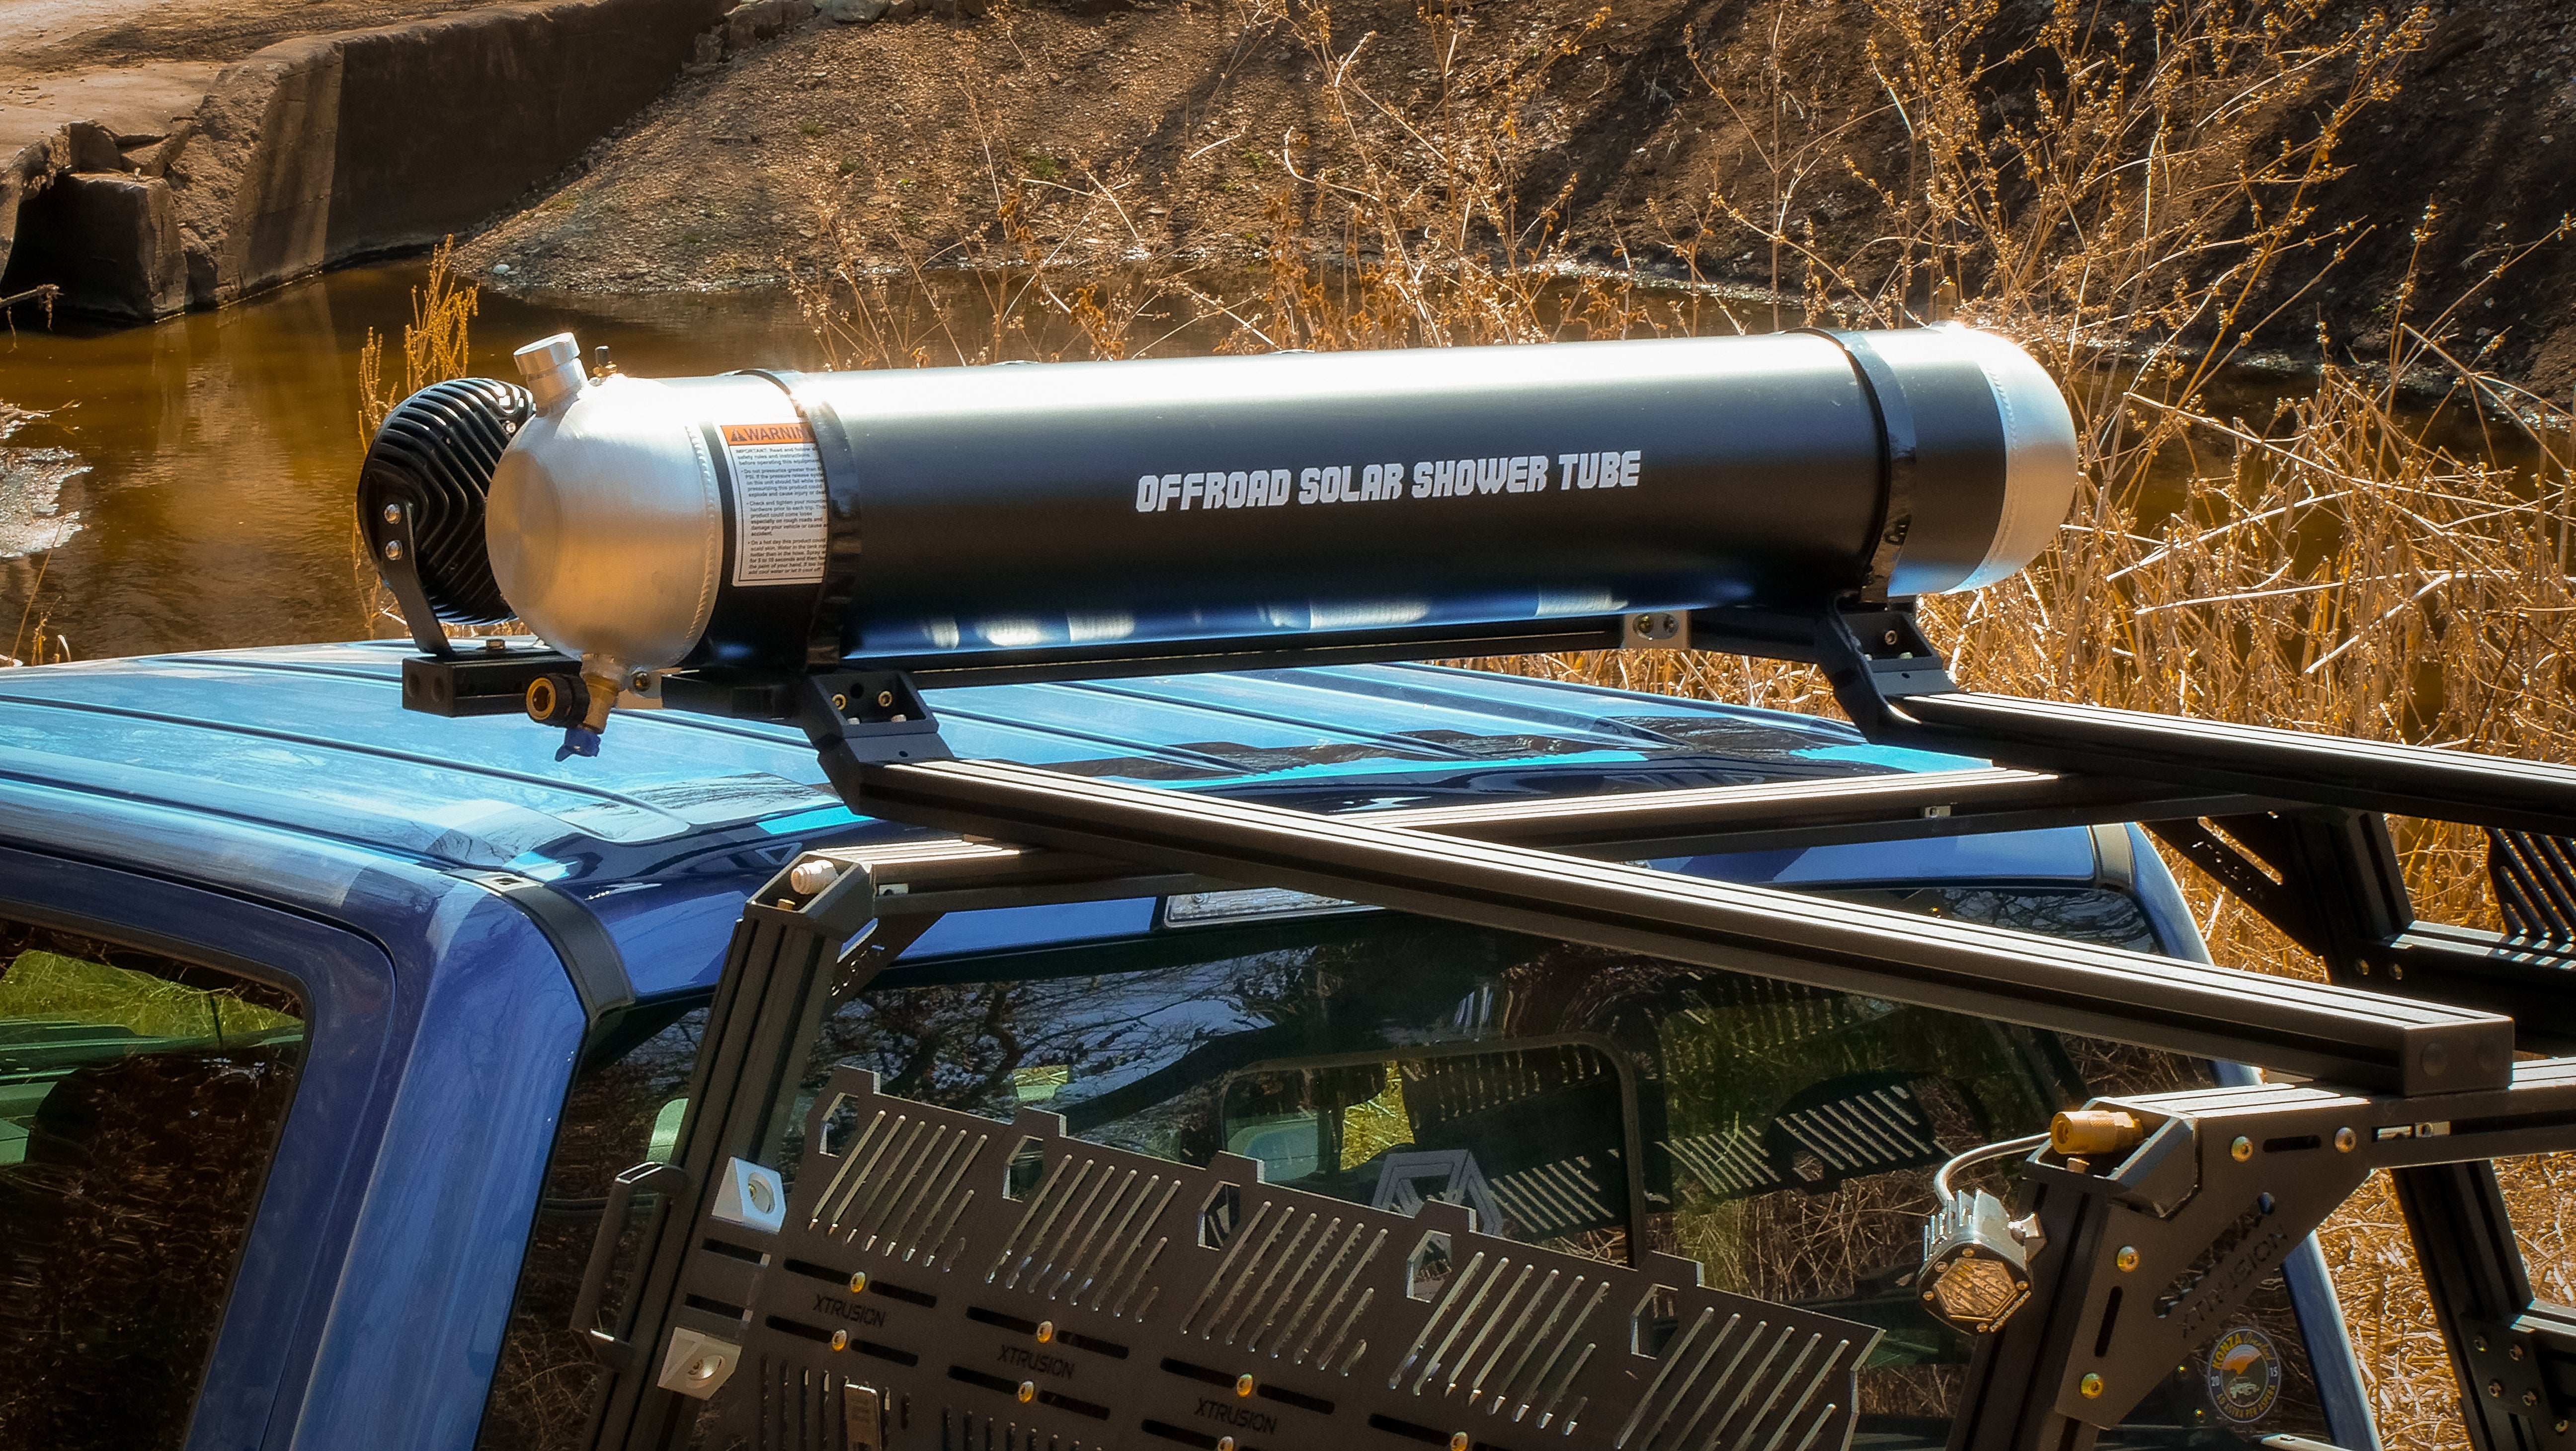 Off-Road Solar Shower Tanks "The Missile"